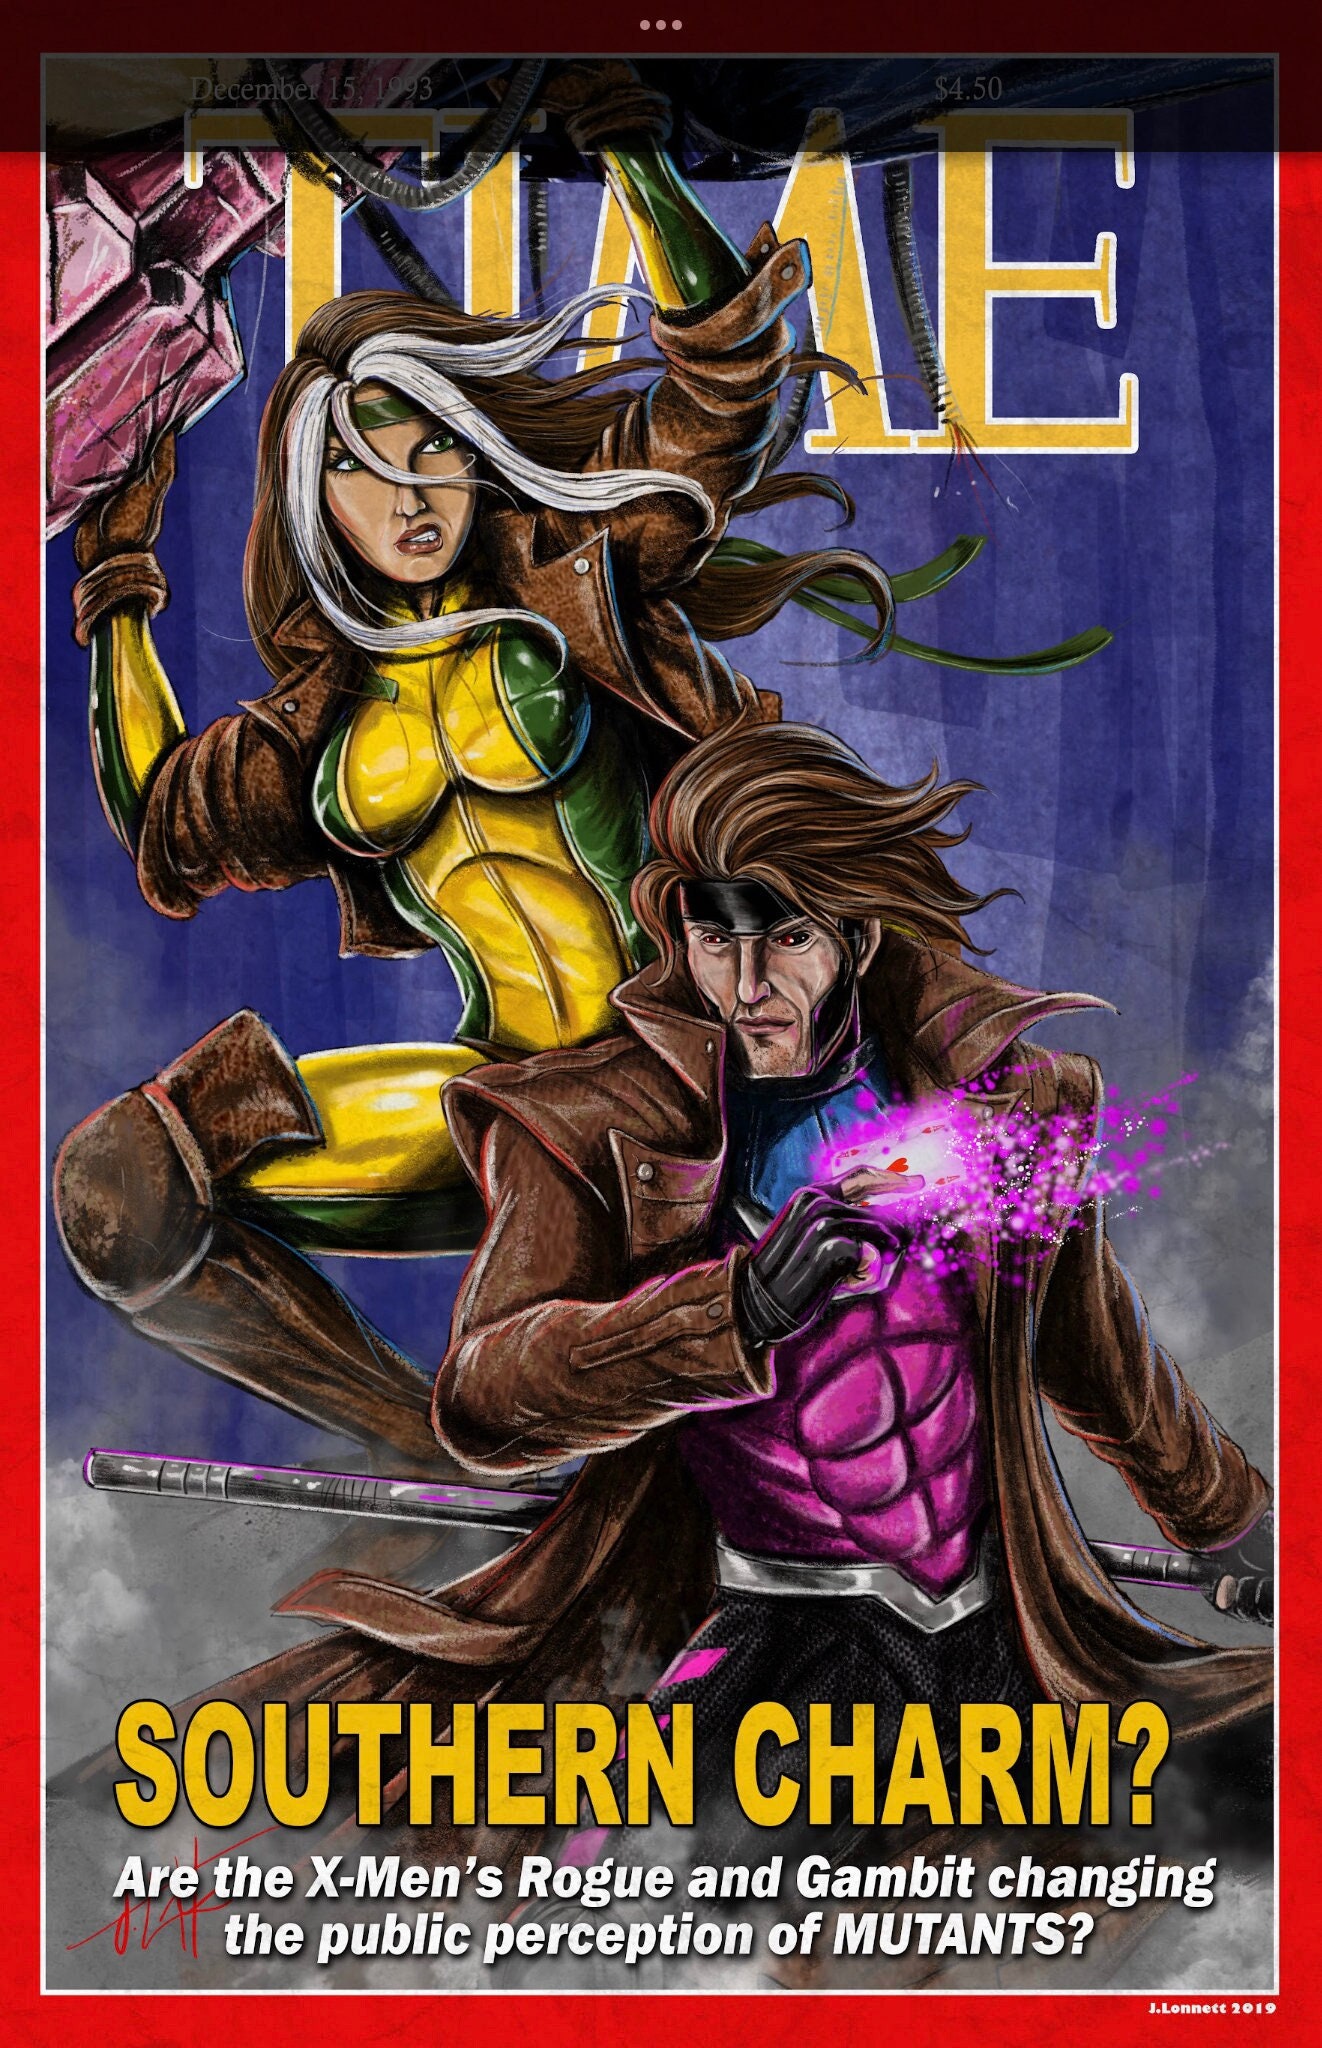 Gambit and Rogue reunite in their own 2023 title